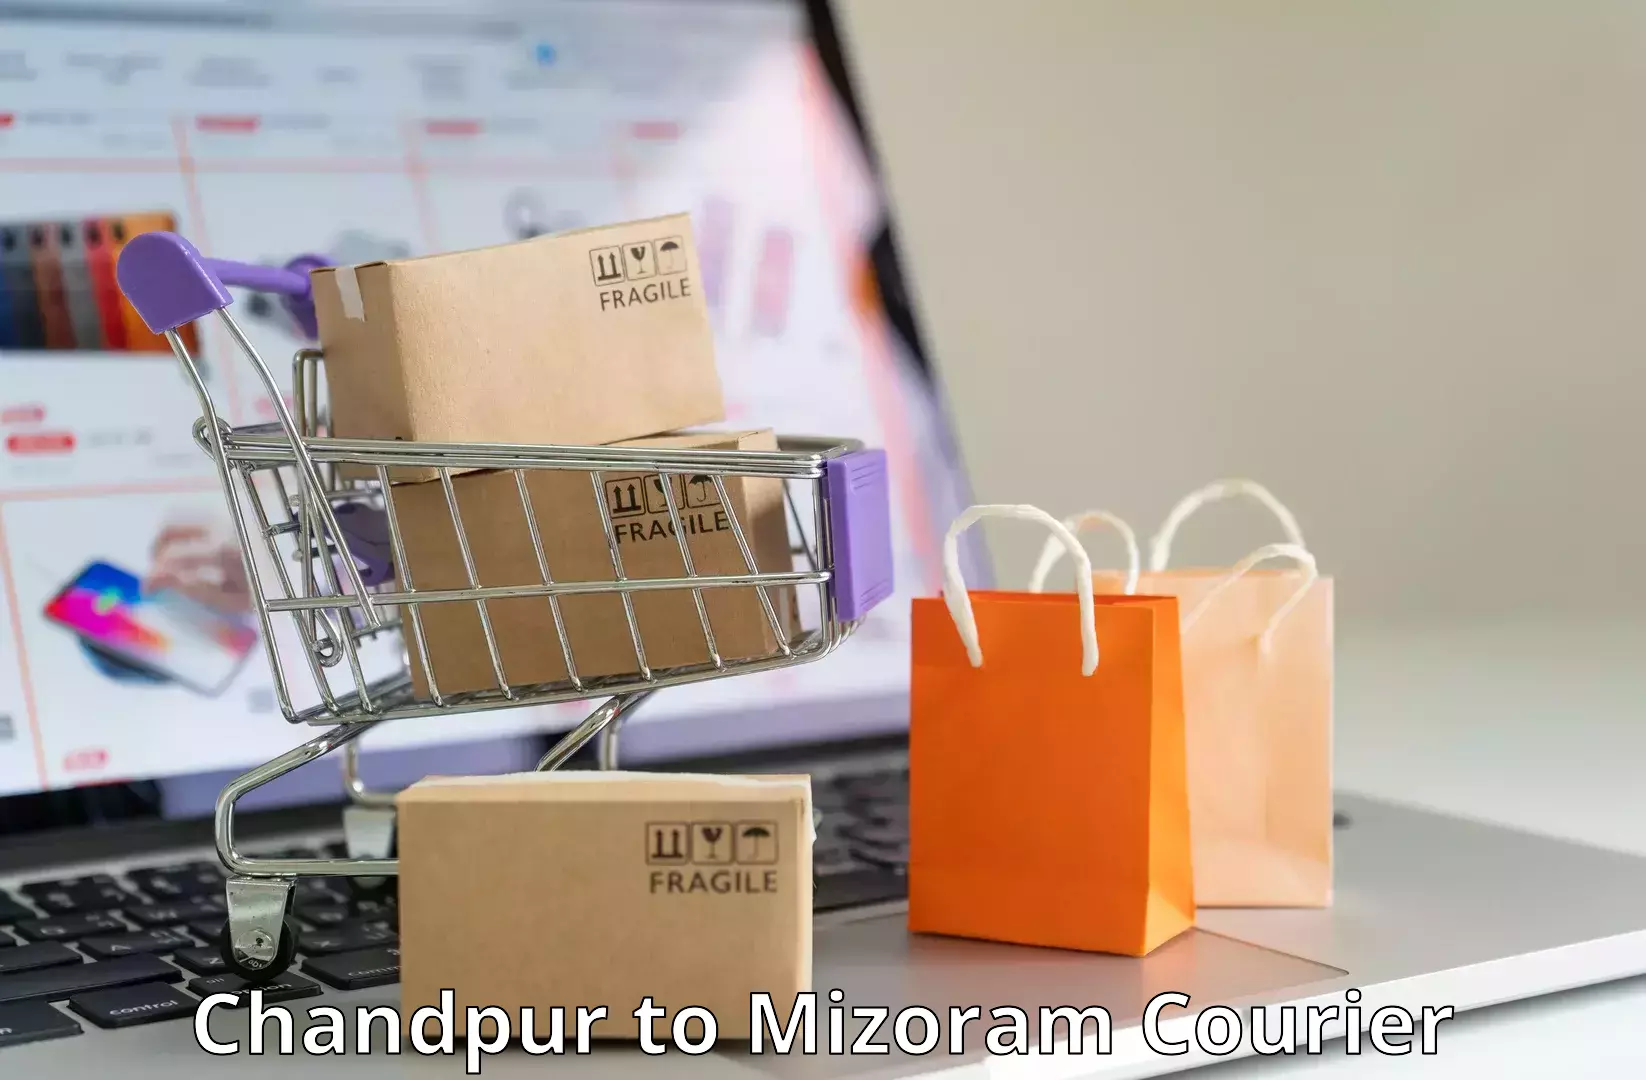 Expedited parcel delivery Chandpur to Aizawl